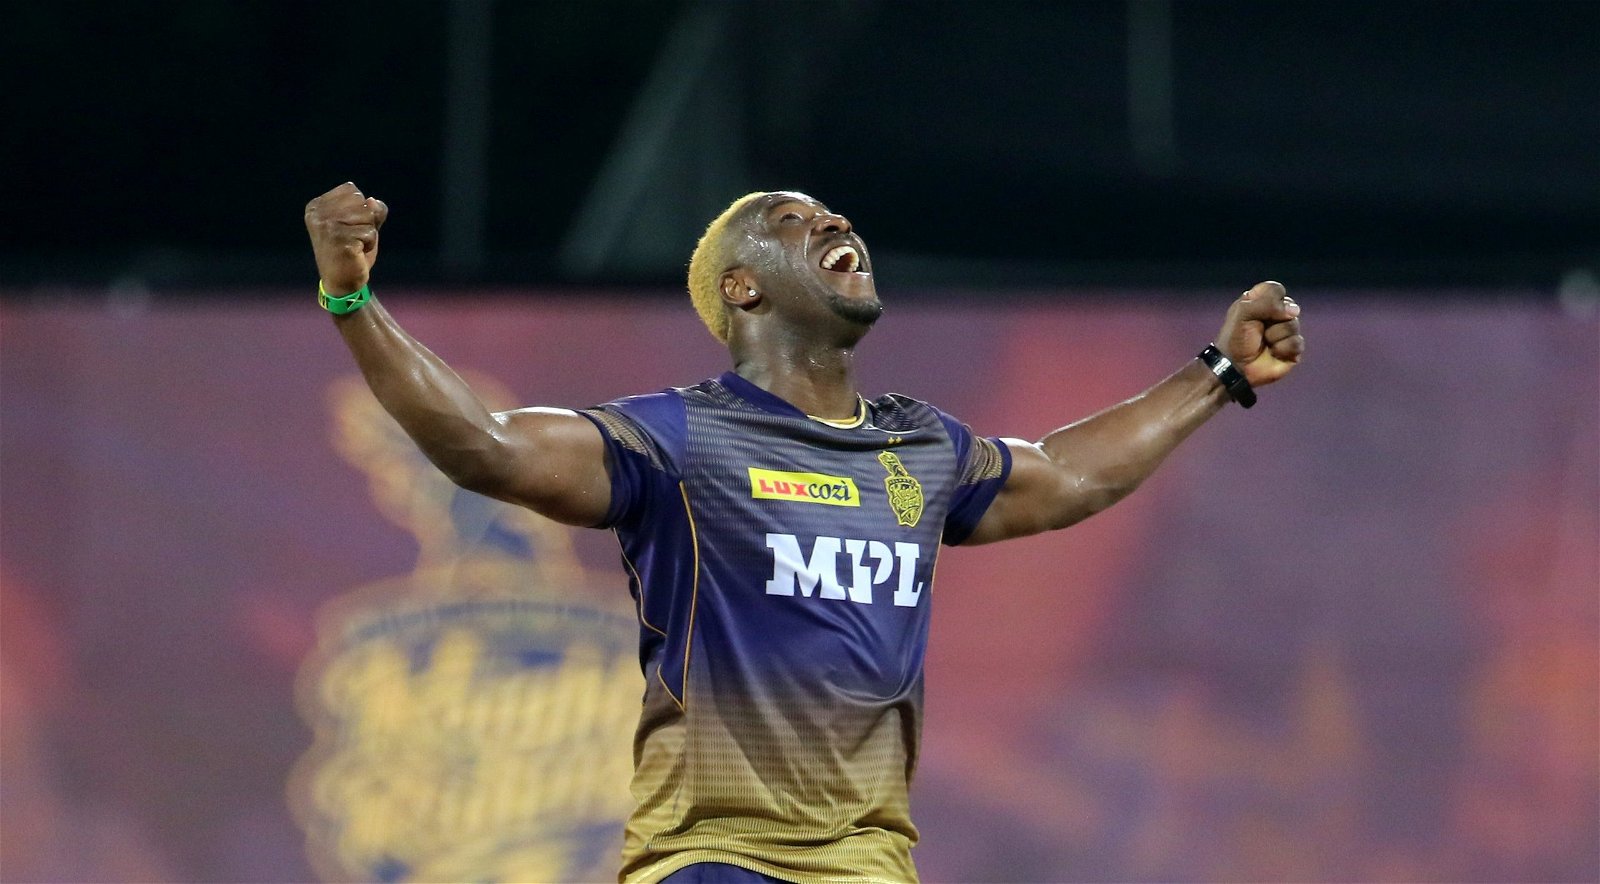 Andre Russell's top 3 performances in the IPL